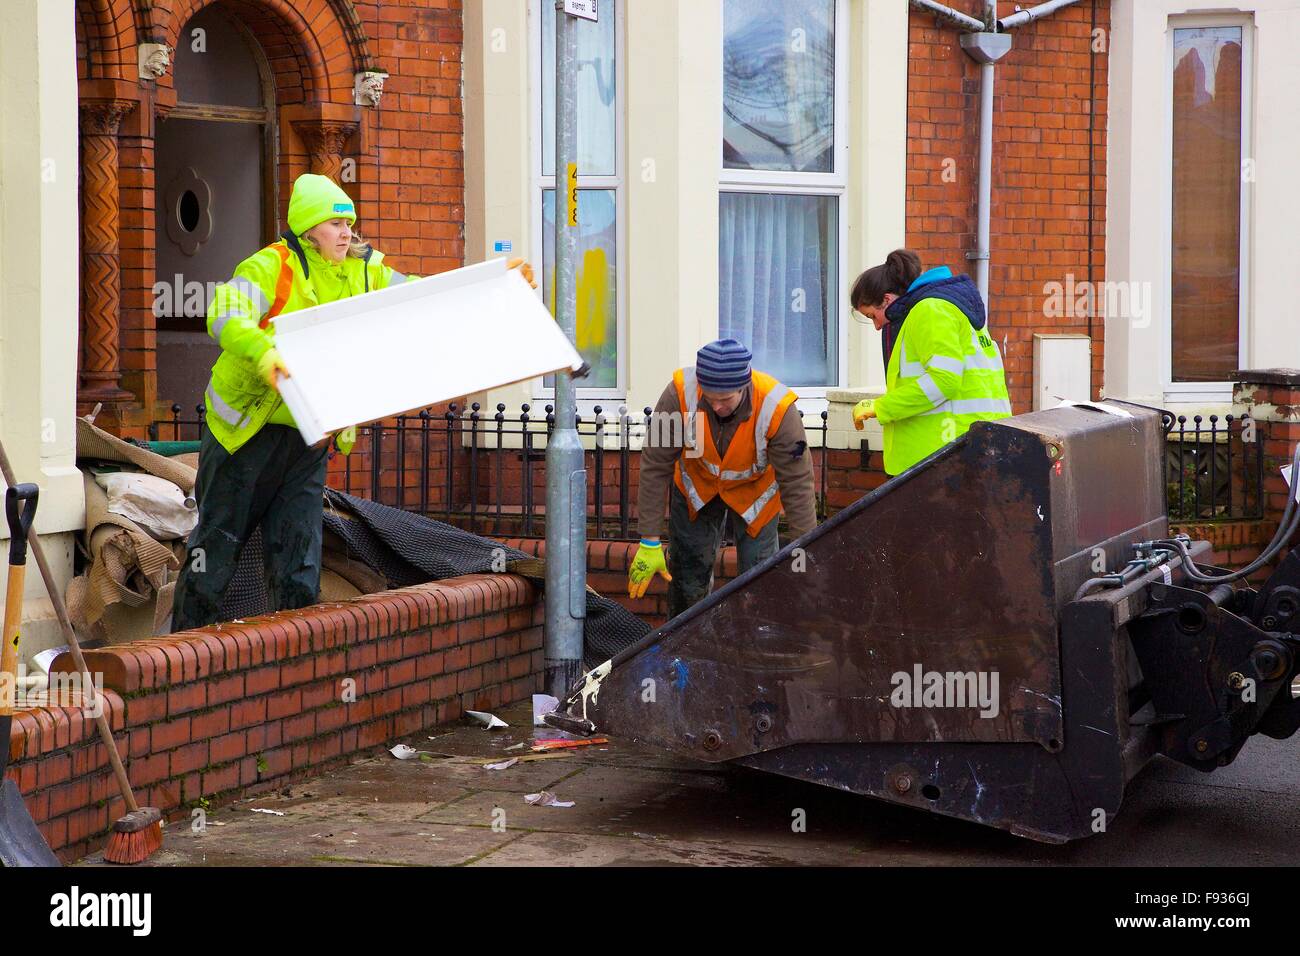 Carlisle, Cumbria, UK. 13 December 2015. Flood damaged property being loaded into digger bucket for disposal outside flooded out house. Flooding caused by Storm Desmond. Credit:  Andrew Findlay/Alamy Live News Stock Photo